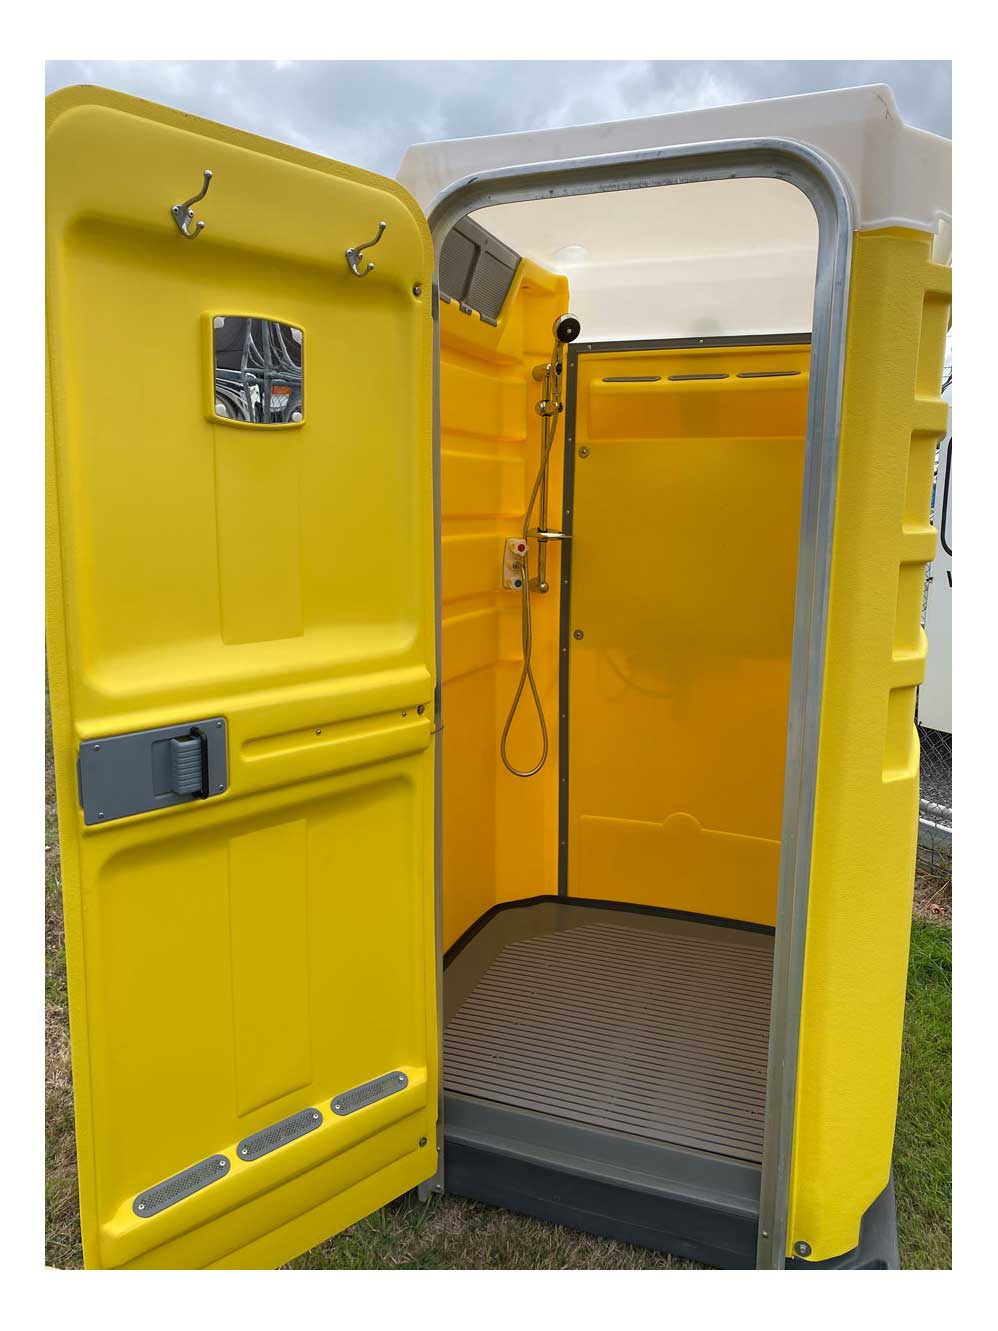 Yellow portable shower with the door open